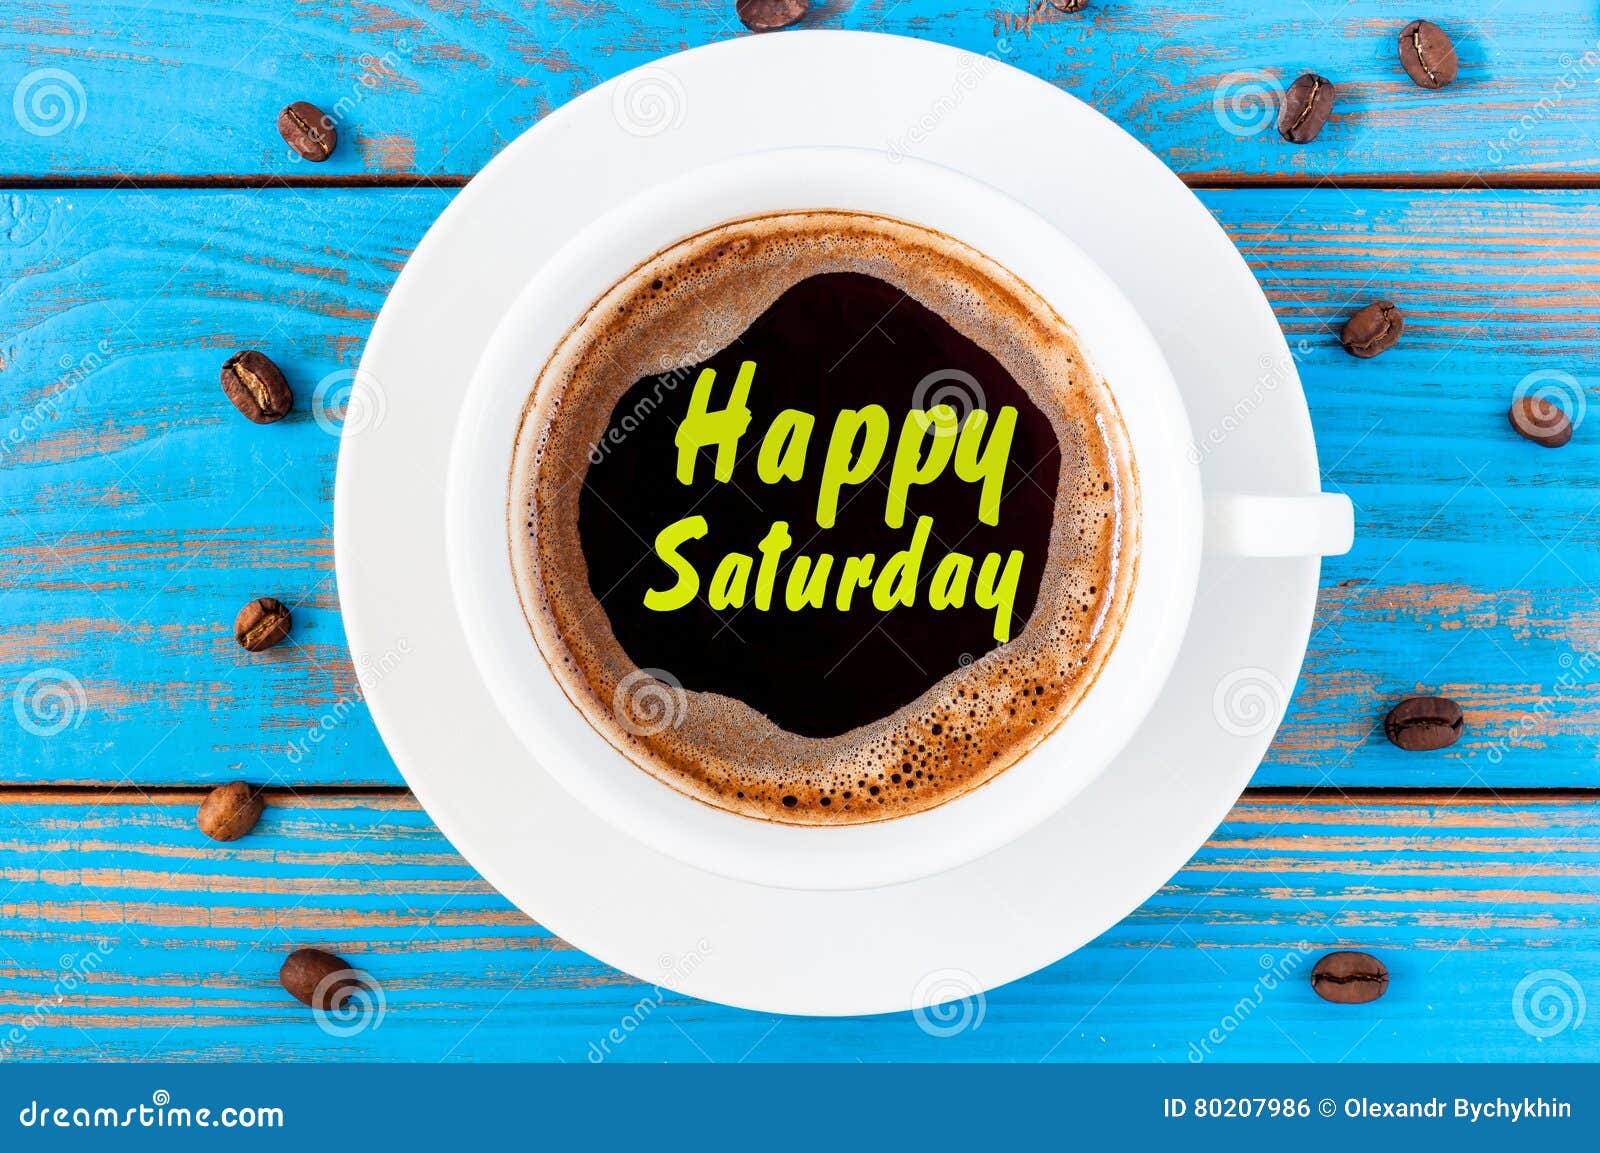 happy saturday written on coffee cup at blue wooden background with beans